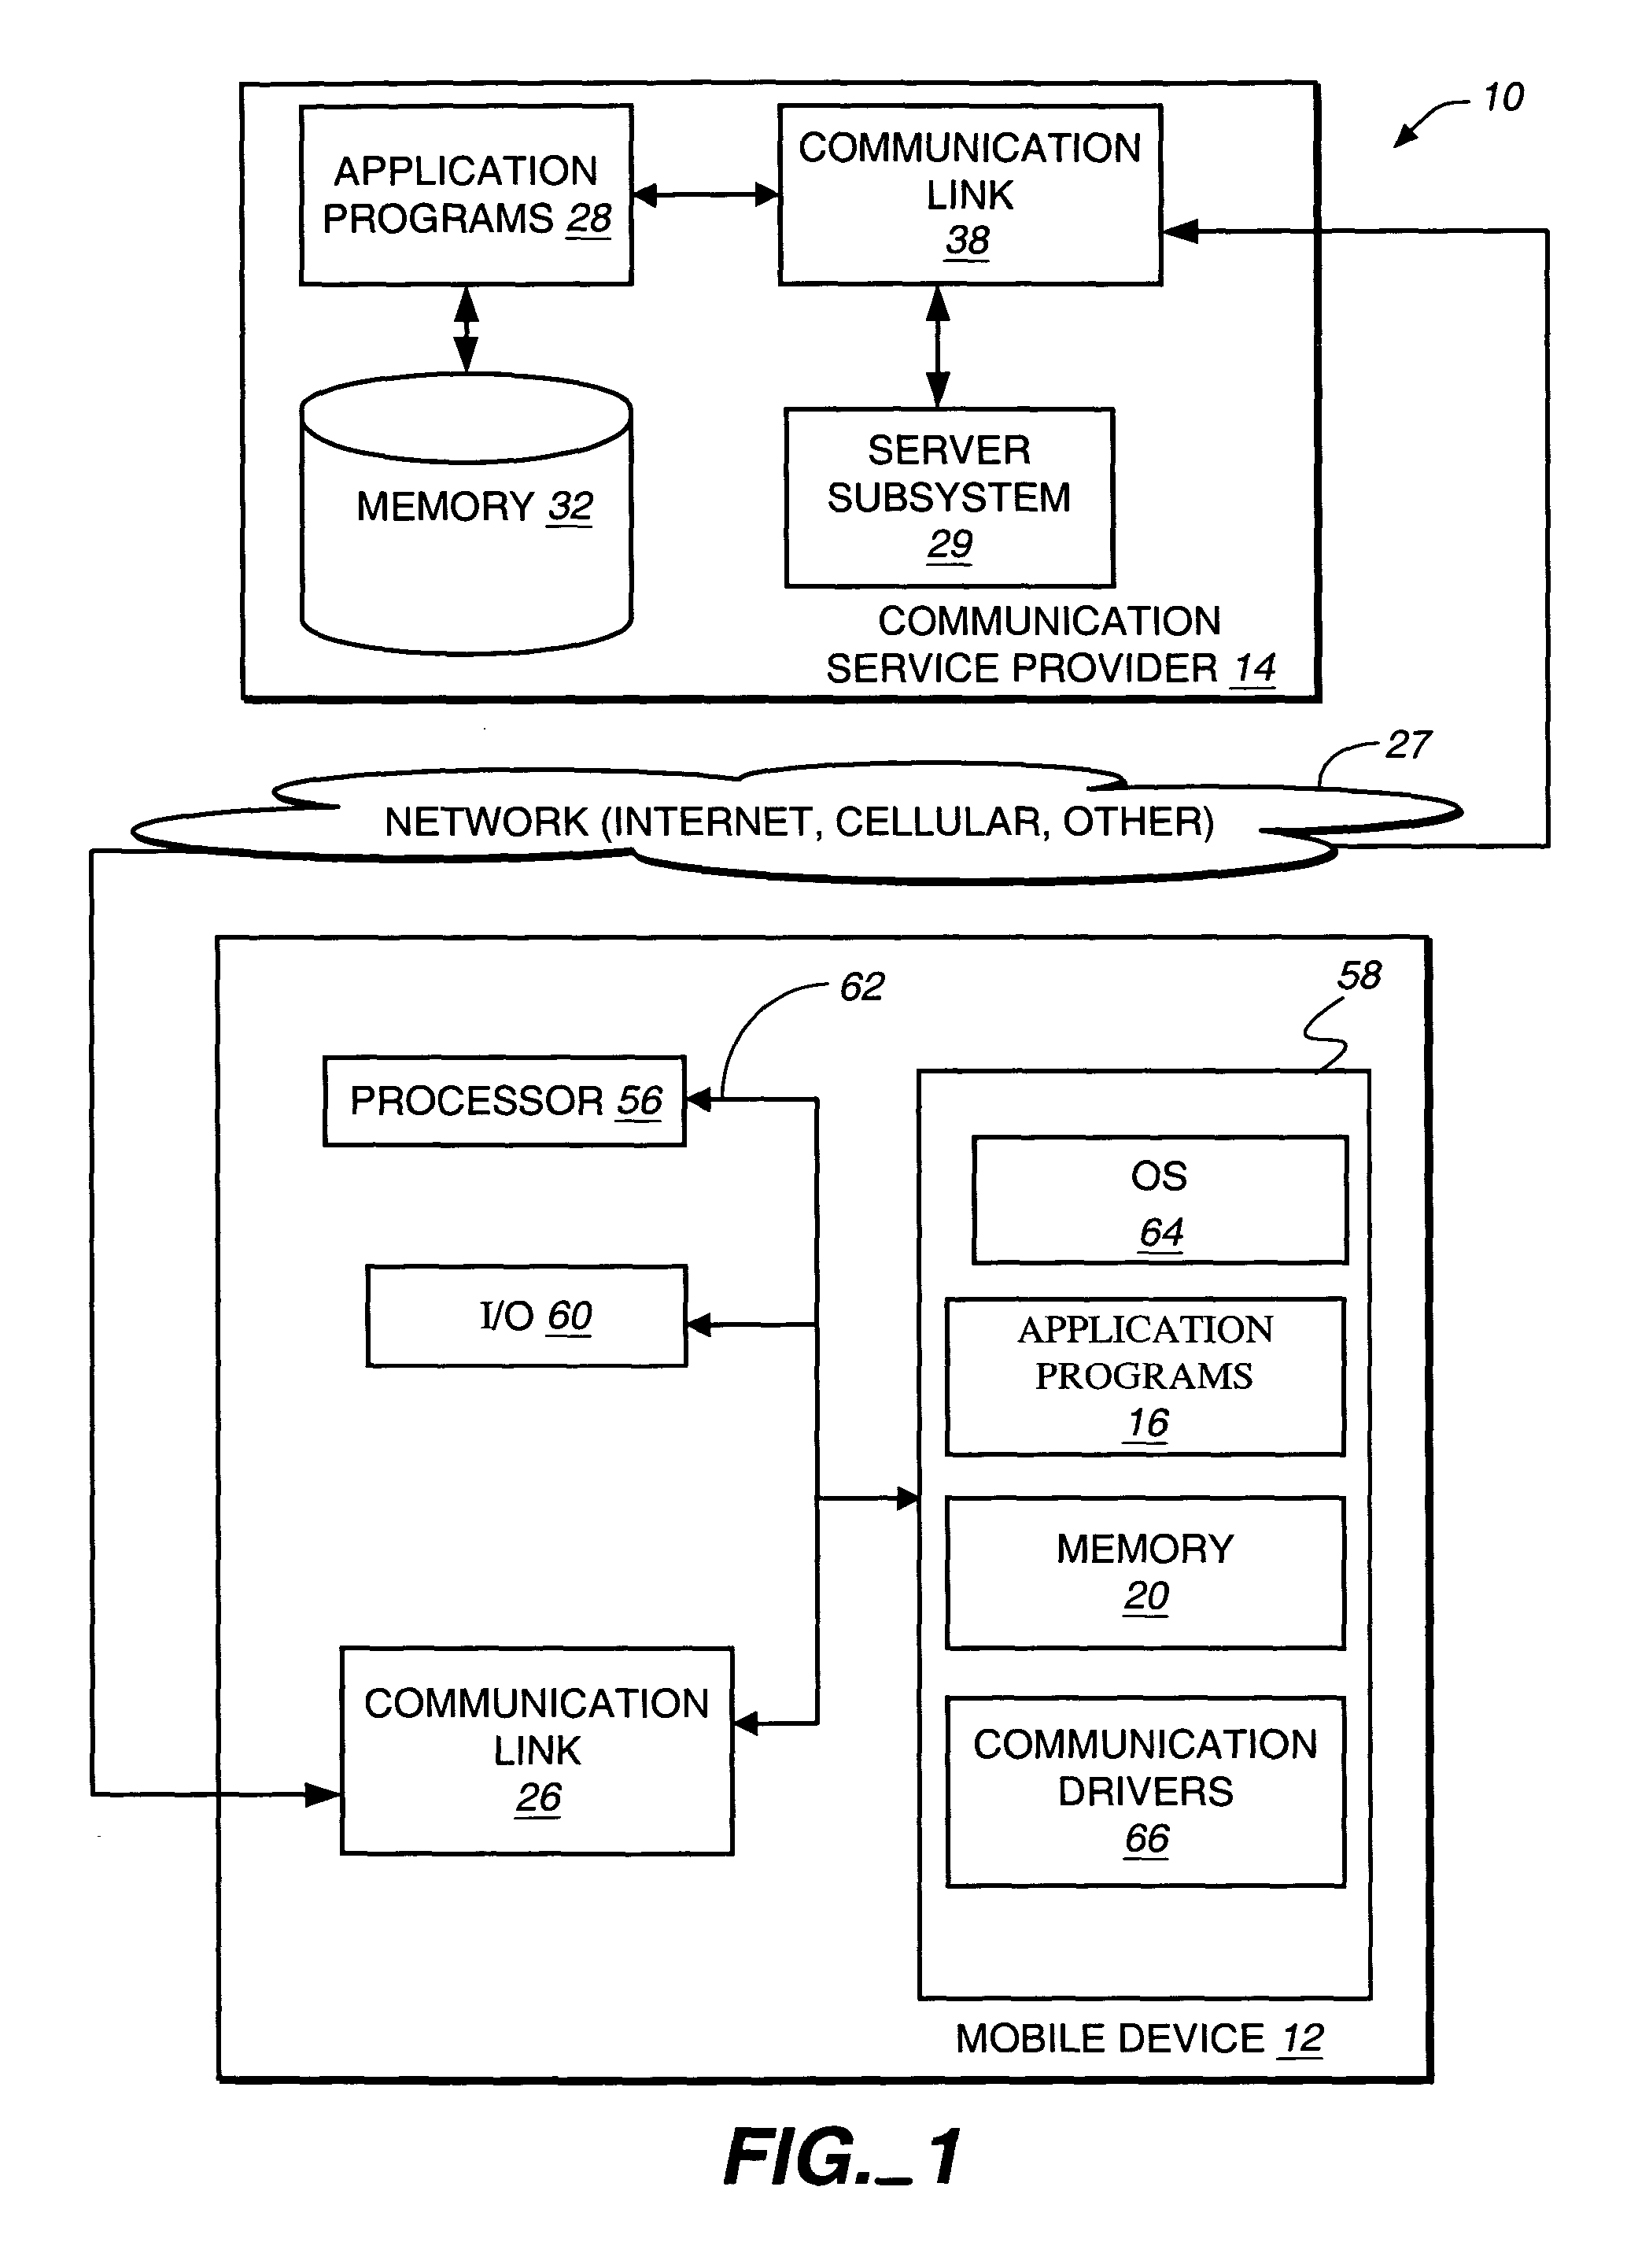 Content and task-execution services provided through dialog-based interfaces